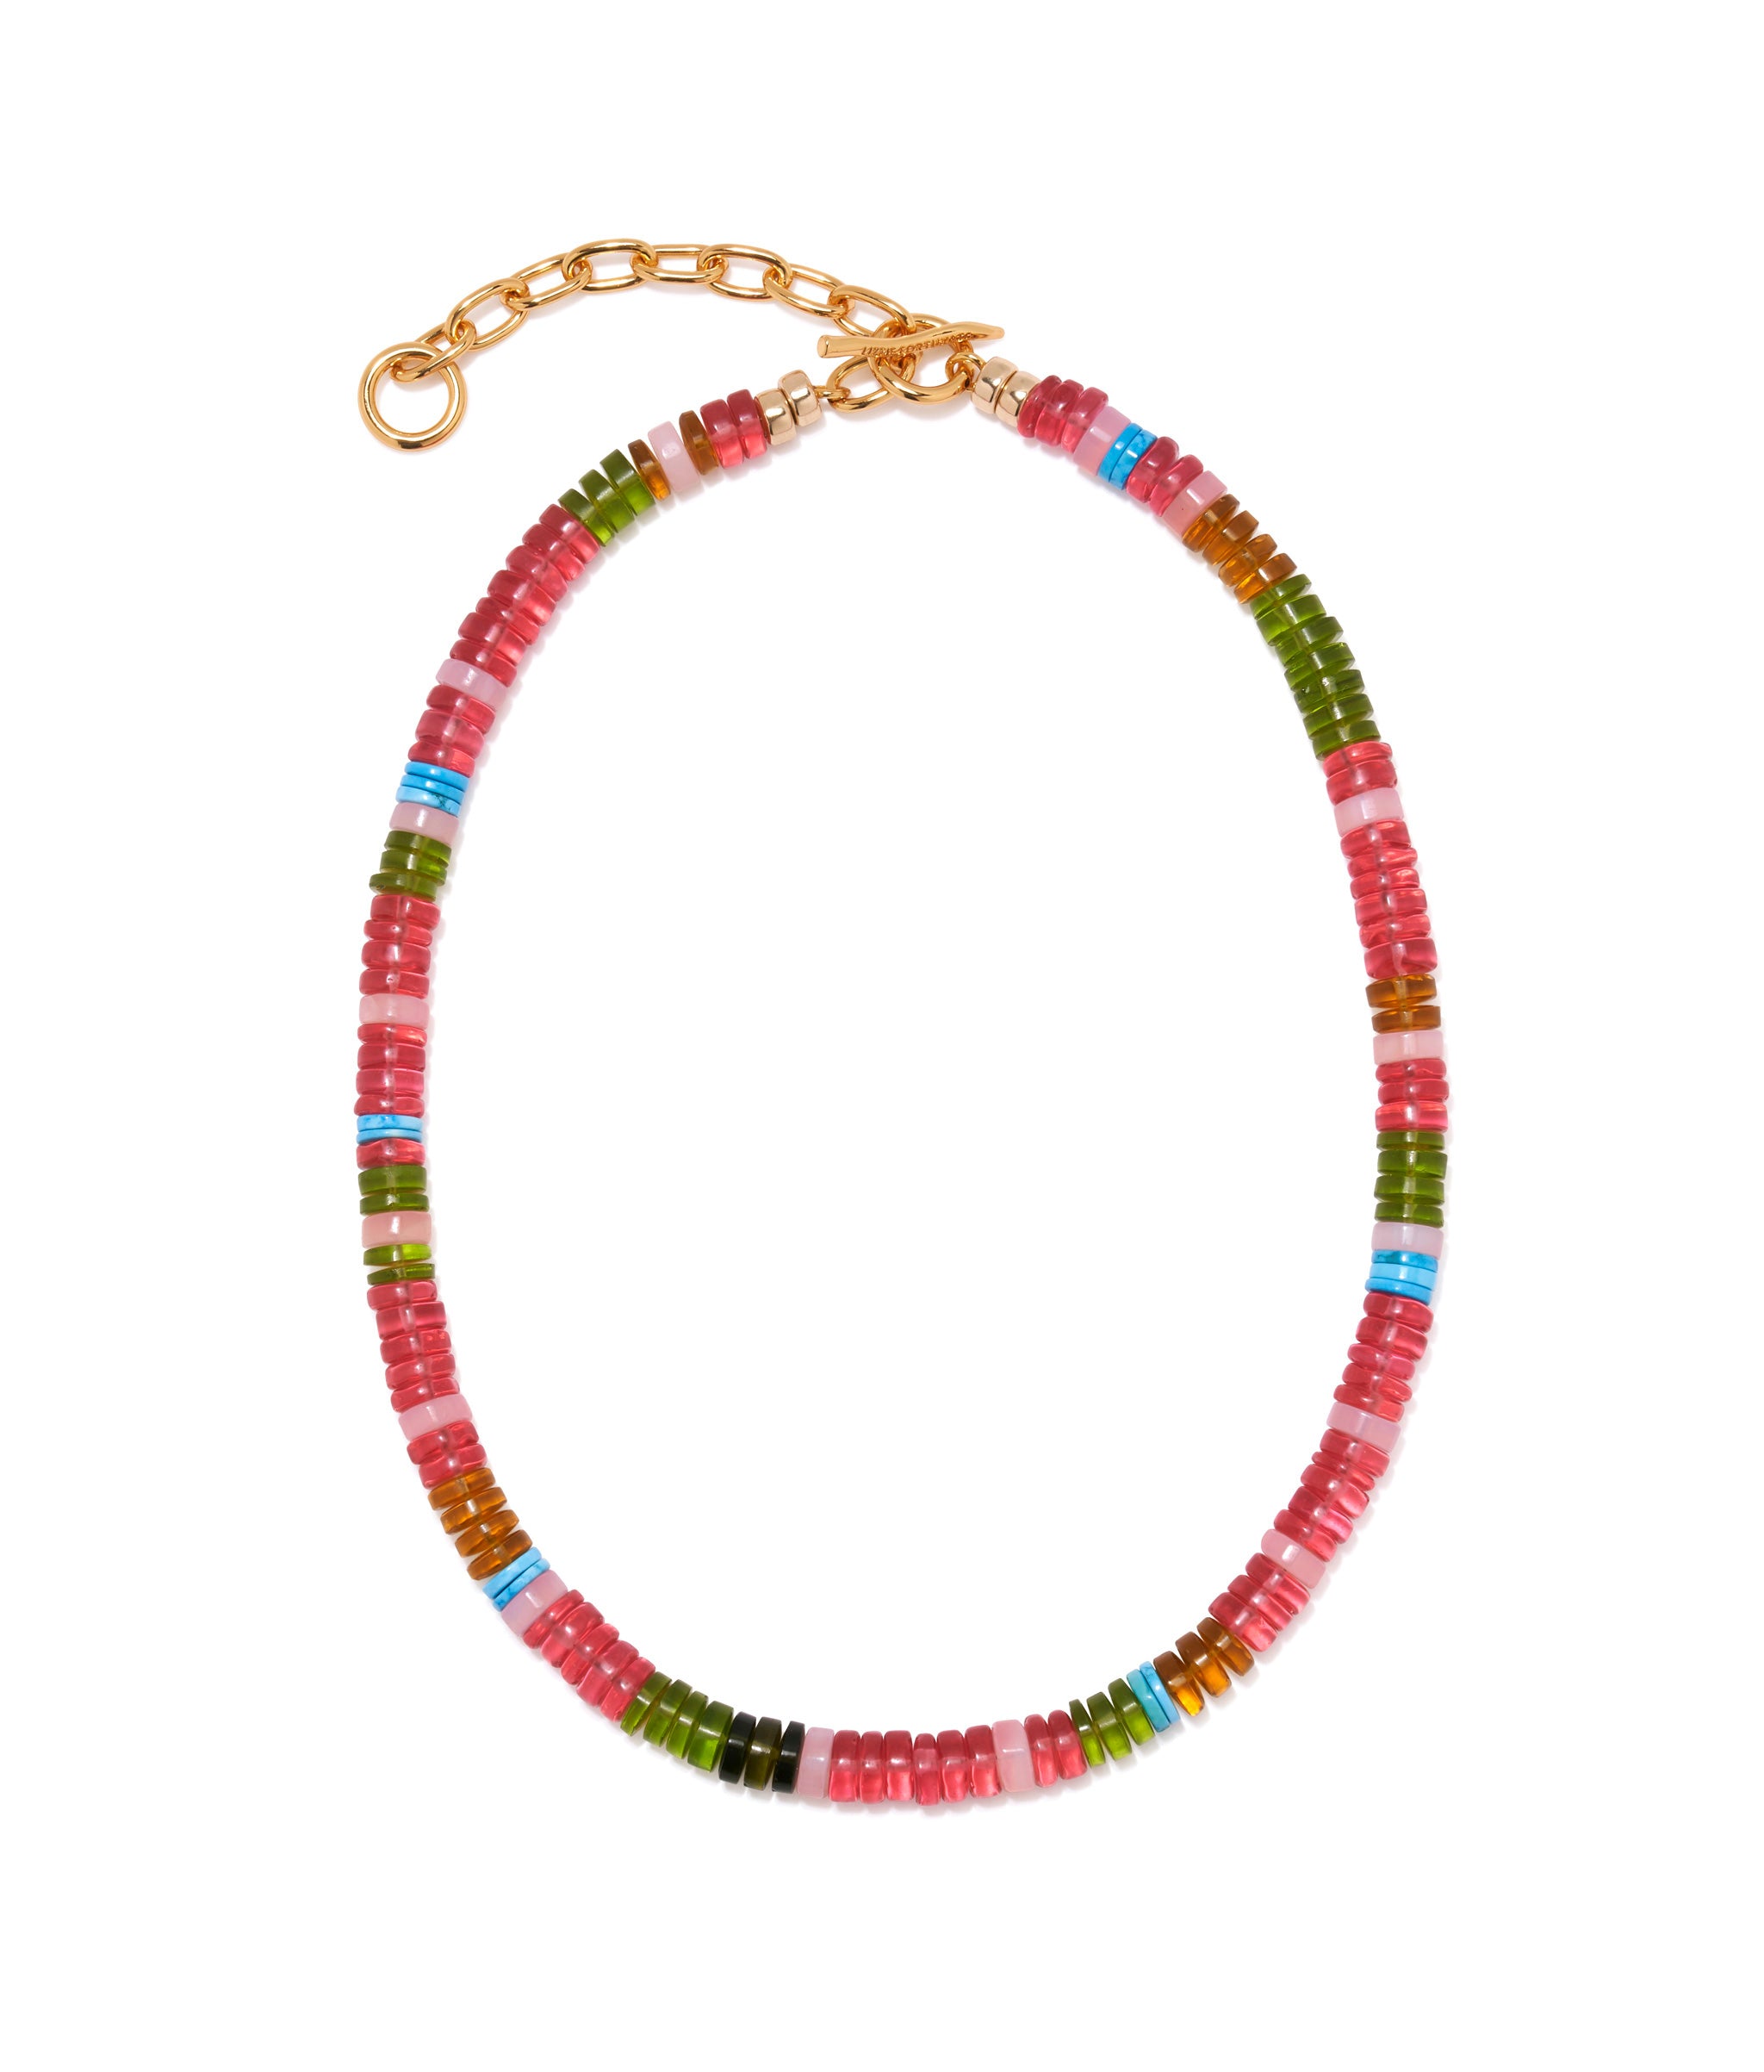 Agosto Necklace in Watermelon. Striped pink glass, citrine, pink opal, howlite beads. Gold-plated brass toggle closure.